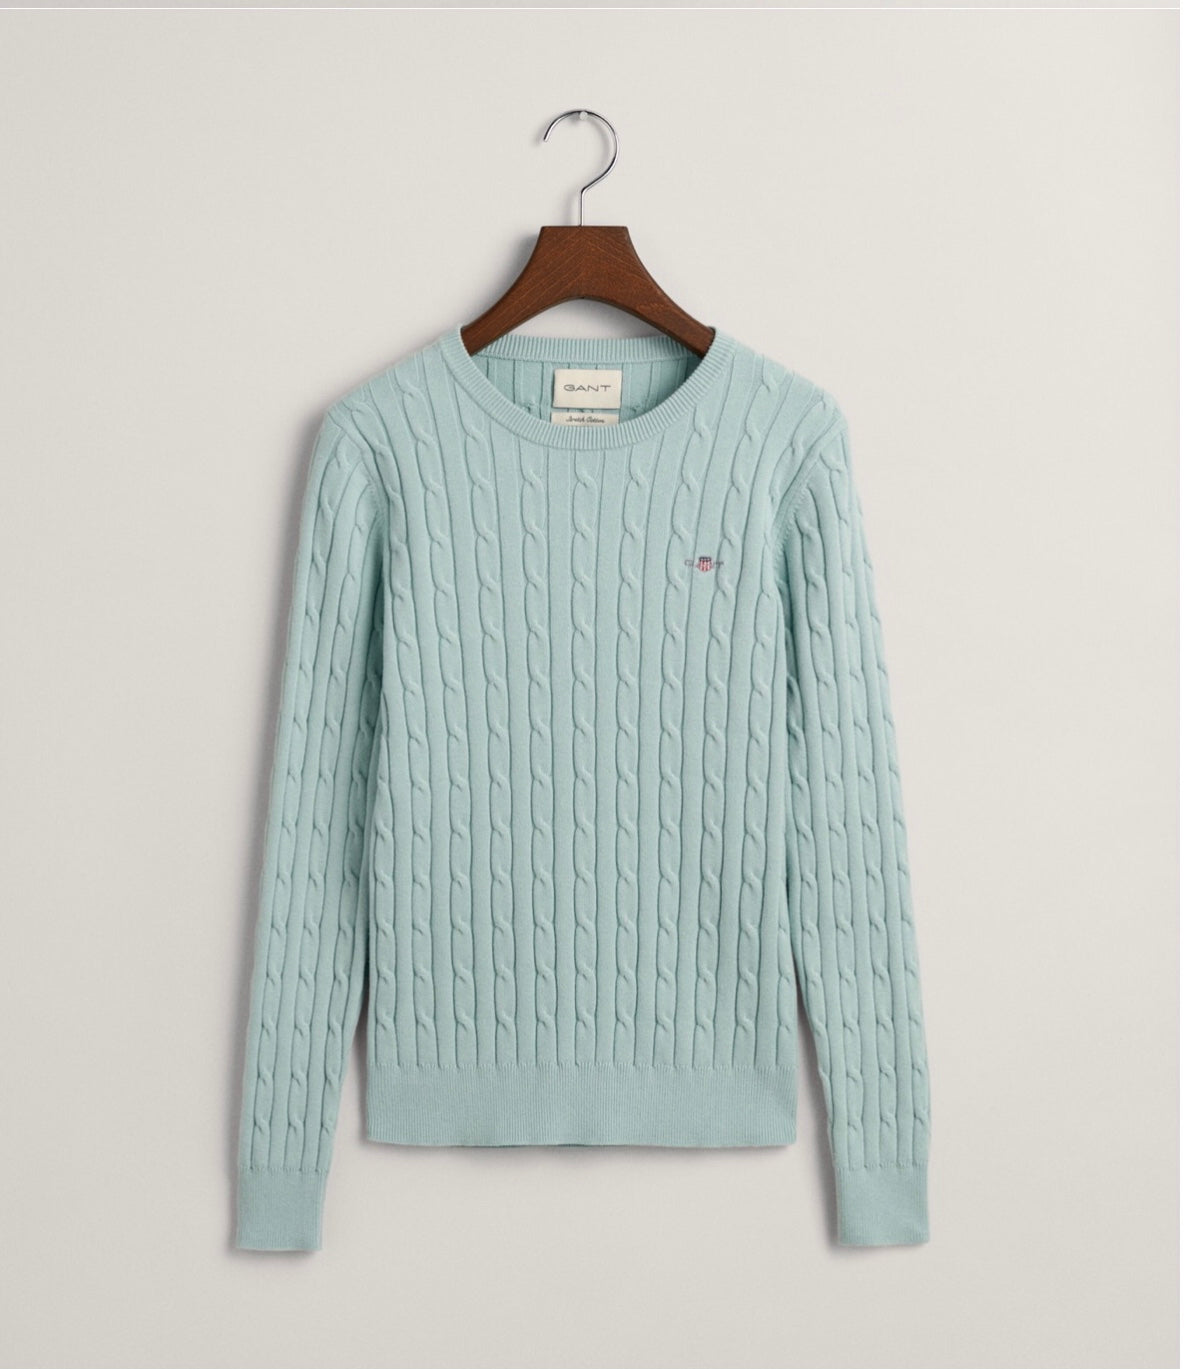 Dusty turquoise cable knit sweater